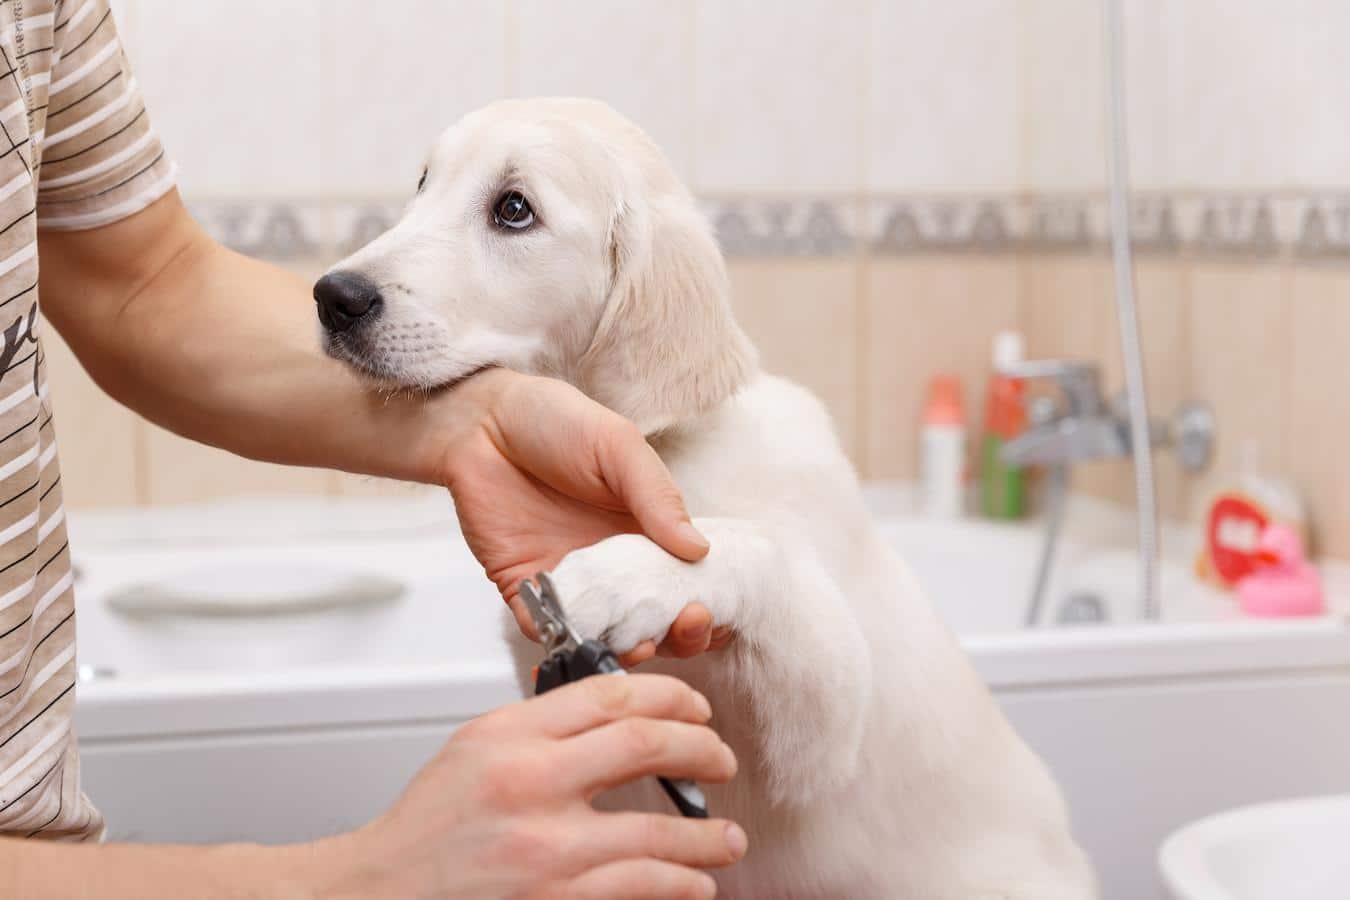 someone clipping dog nails bathed veterinarian dogs veterinarian dirt dogs